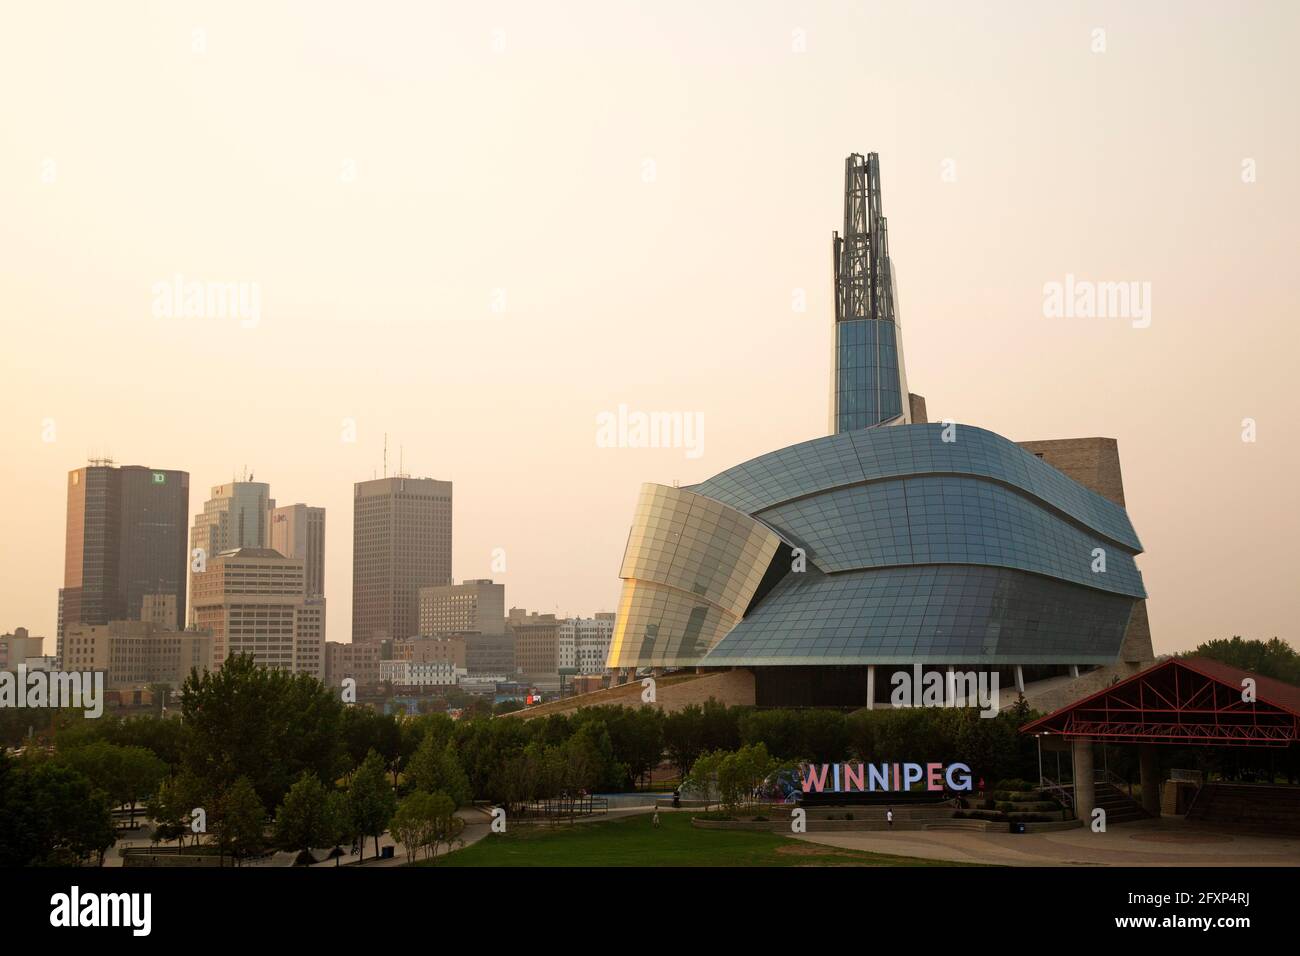 The skyline of Winnipeg, Canada, seen during the evening. The Canadian Museum for Human Rights stands on the right of the urban scene. Stock Photo